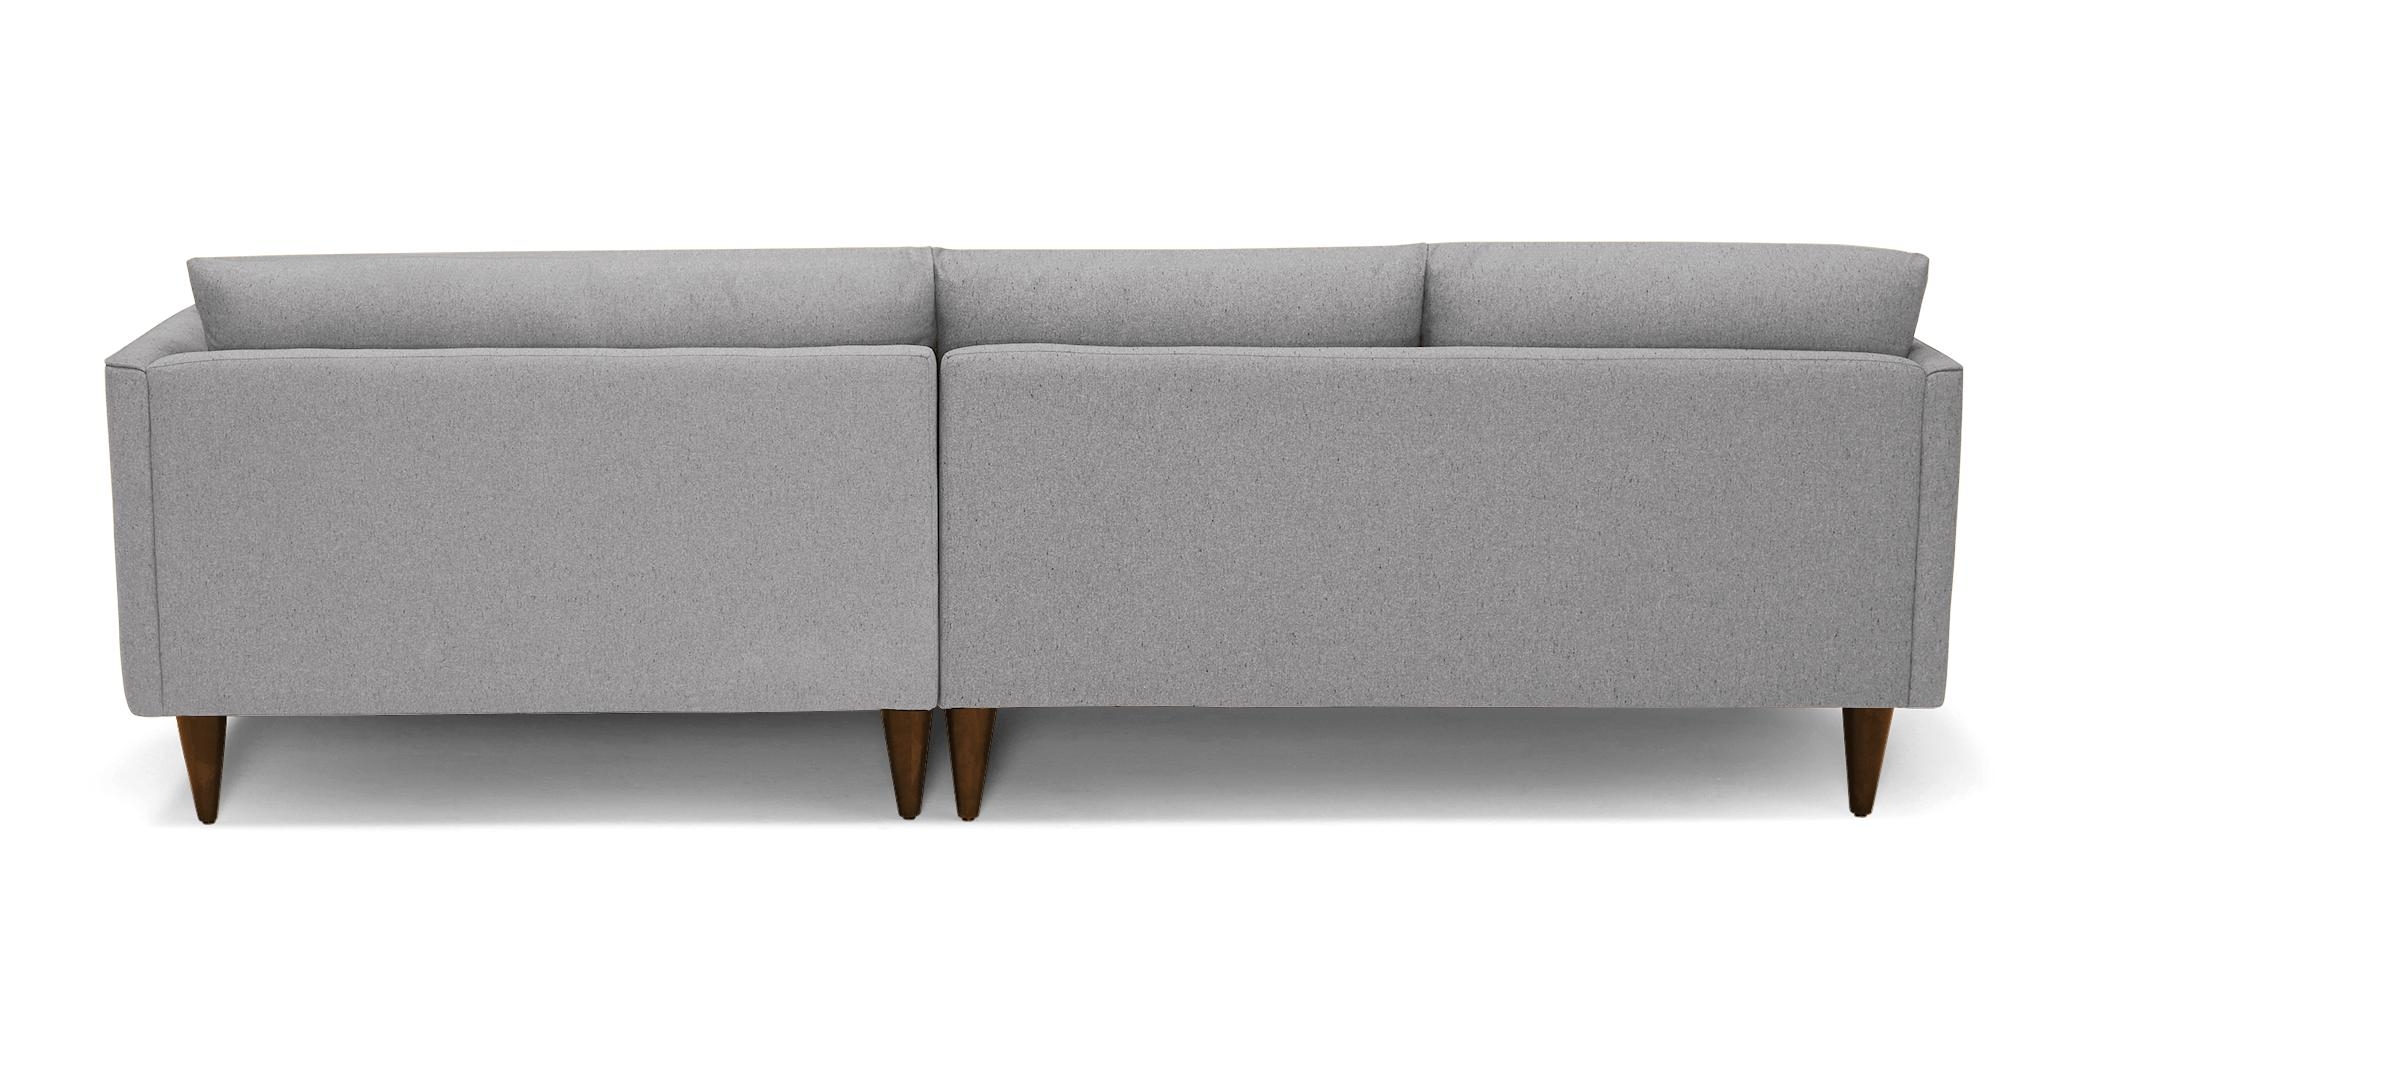 Gray Lewis Mid Century Modern Sectional - Royale Ash - Mocha - Left - Cone - Image 4